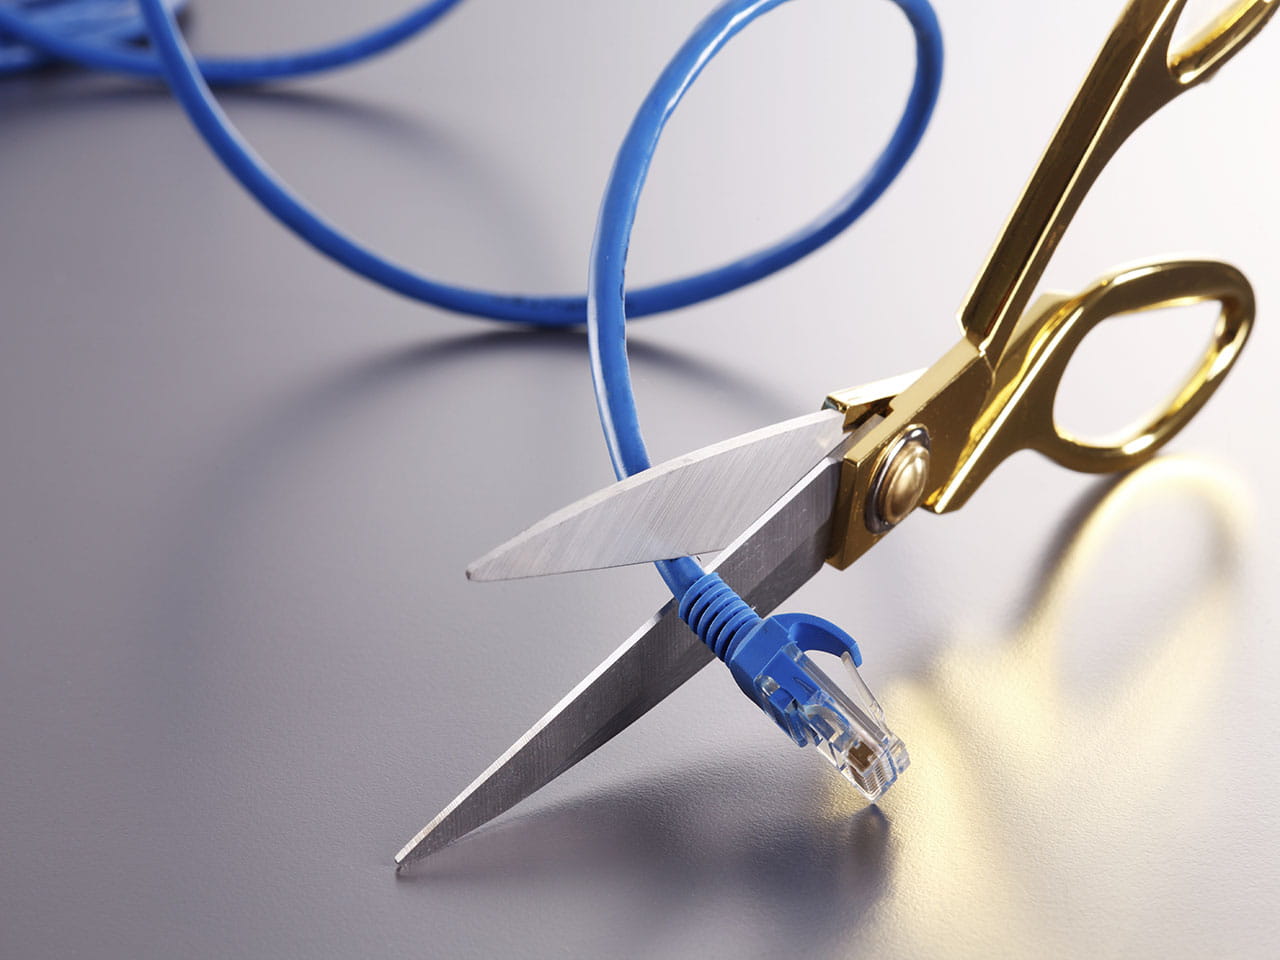 Cable being cut by scissors